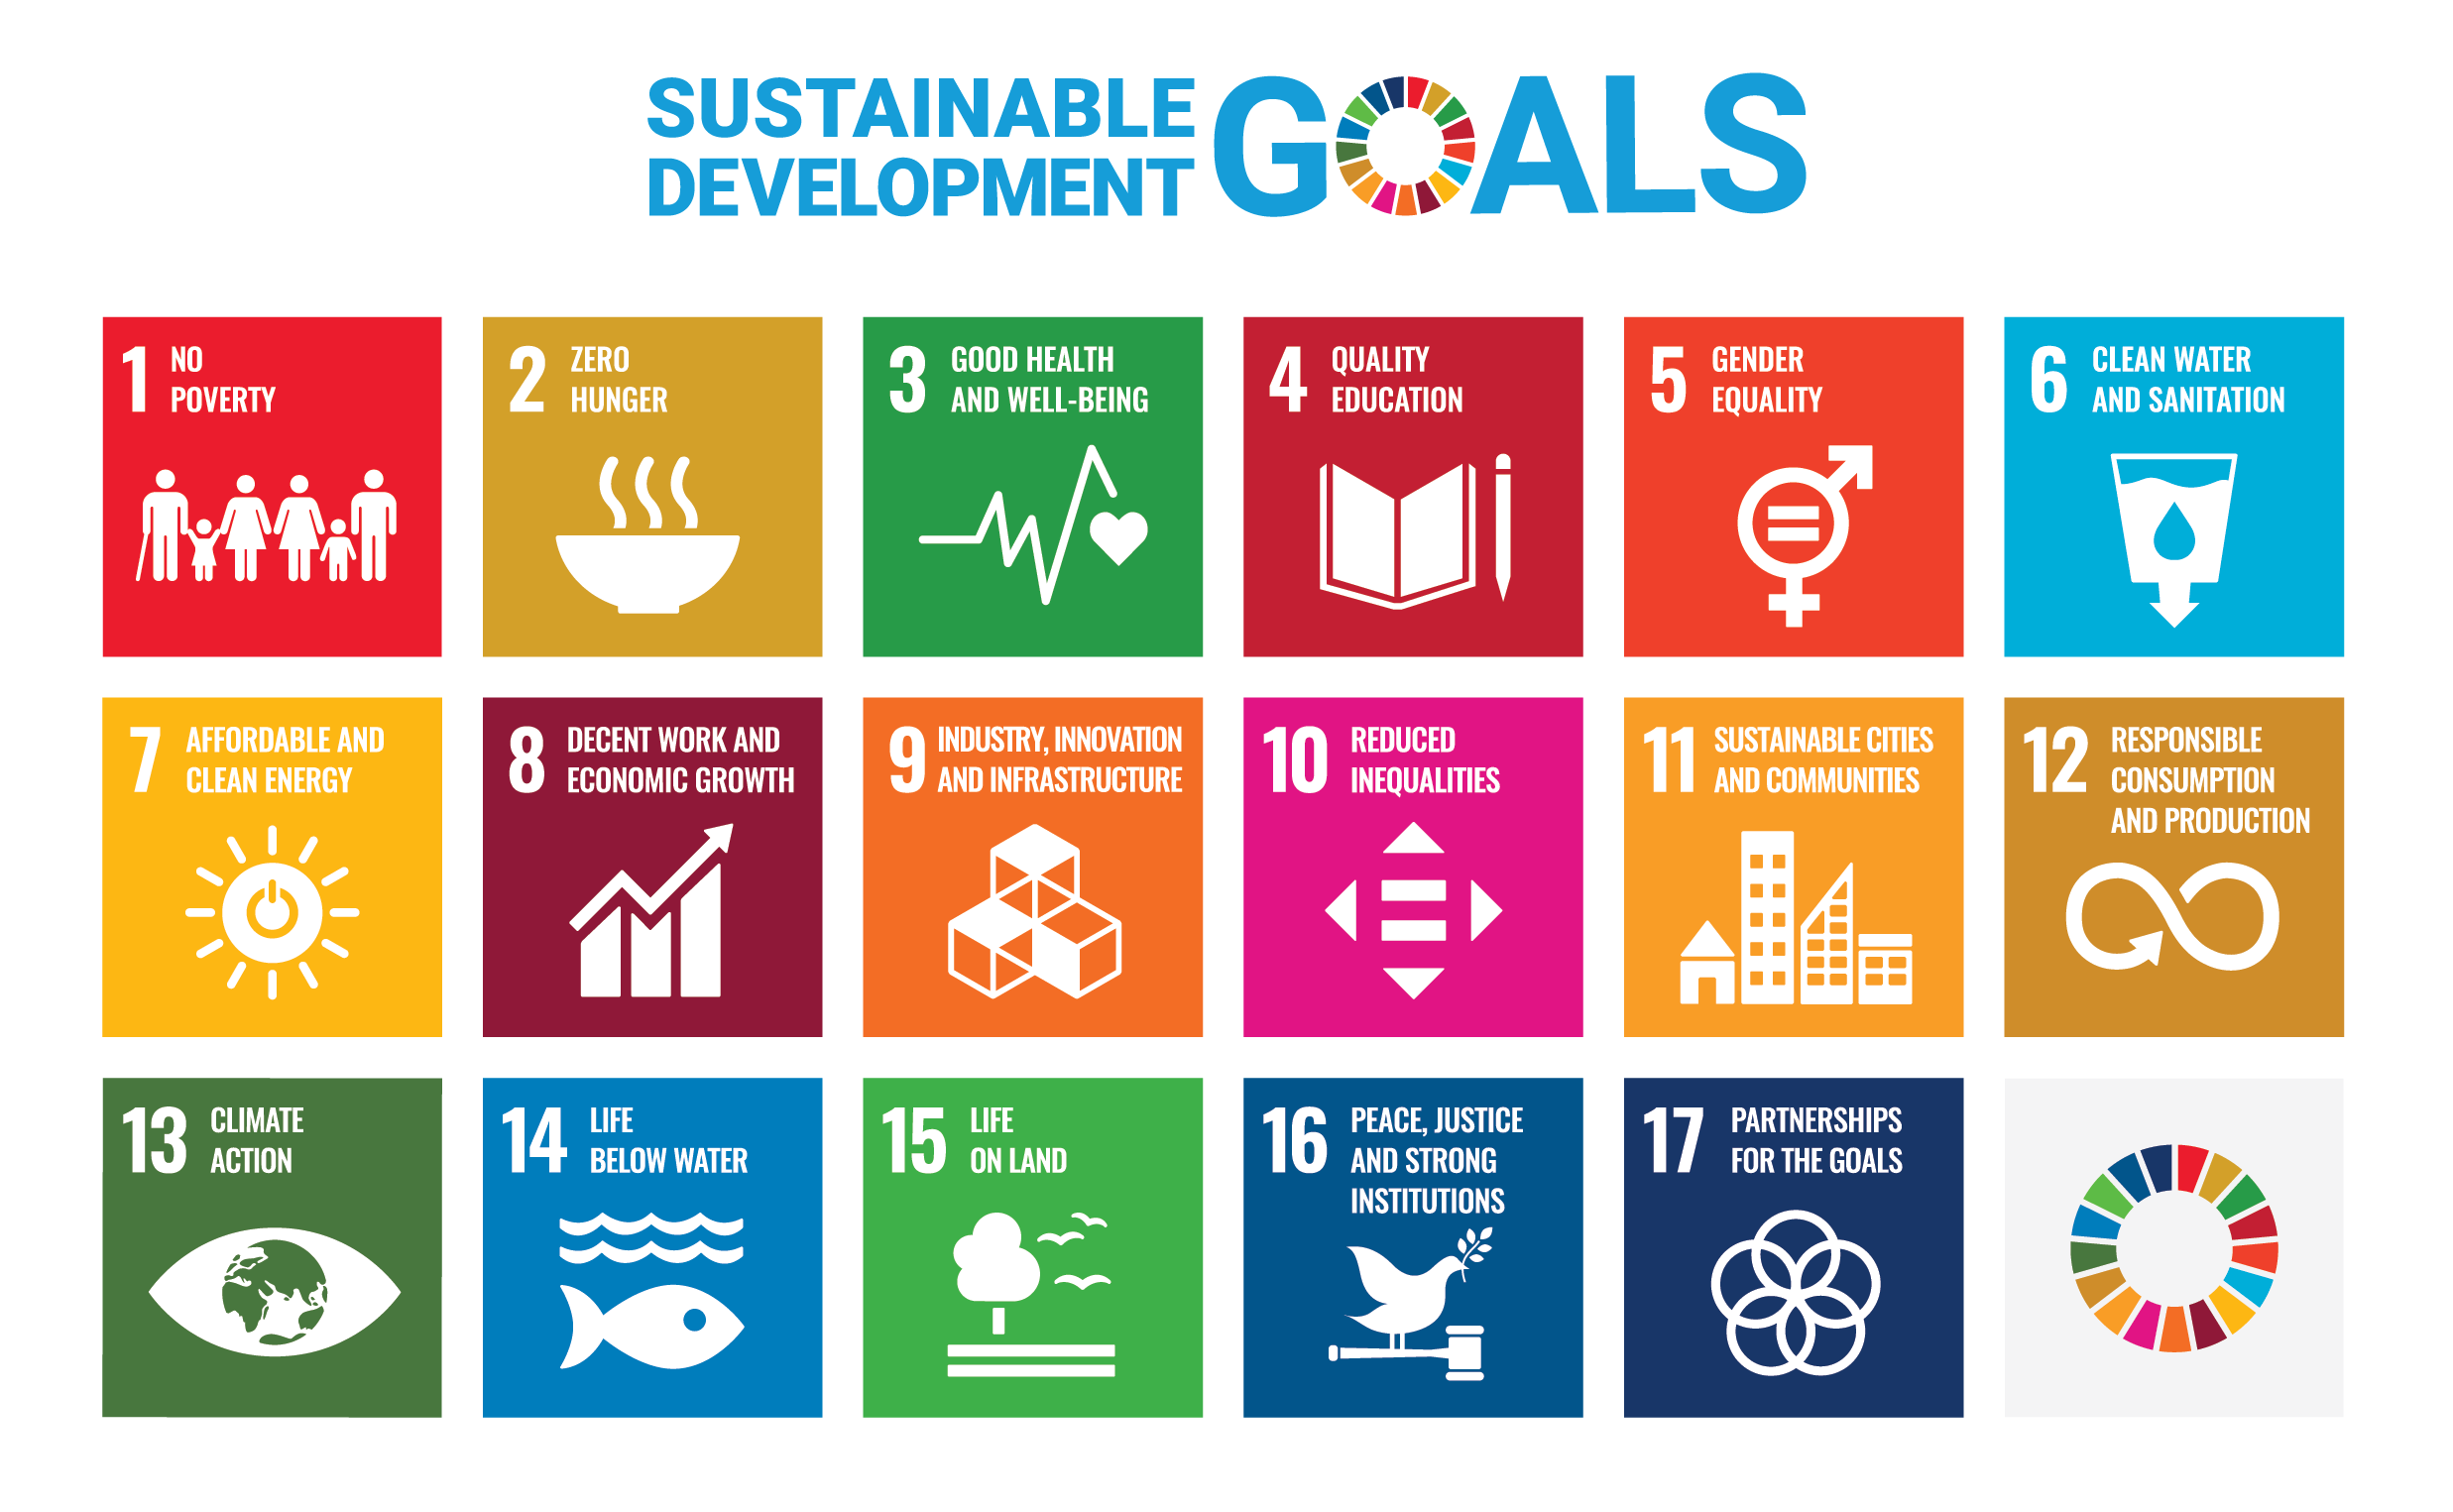 A graphic representation of the U.N. Sustainable Development Goals